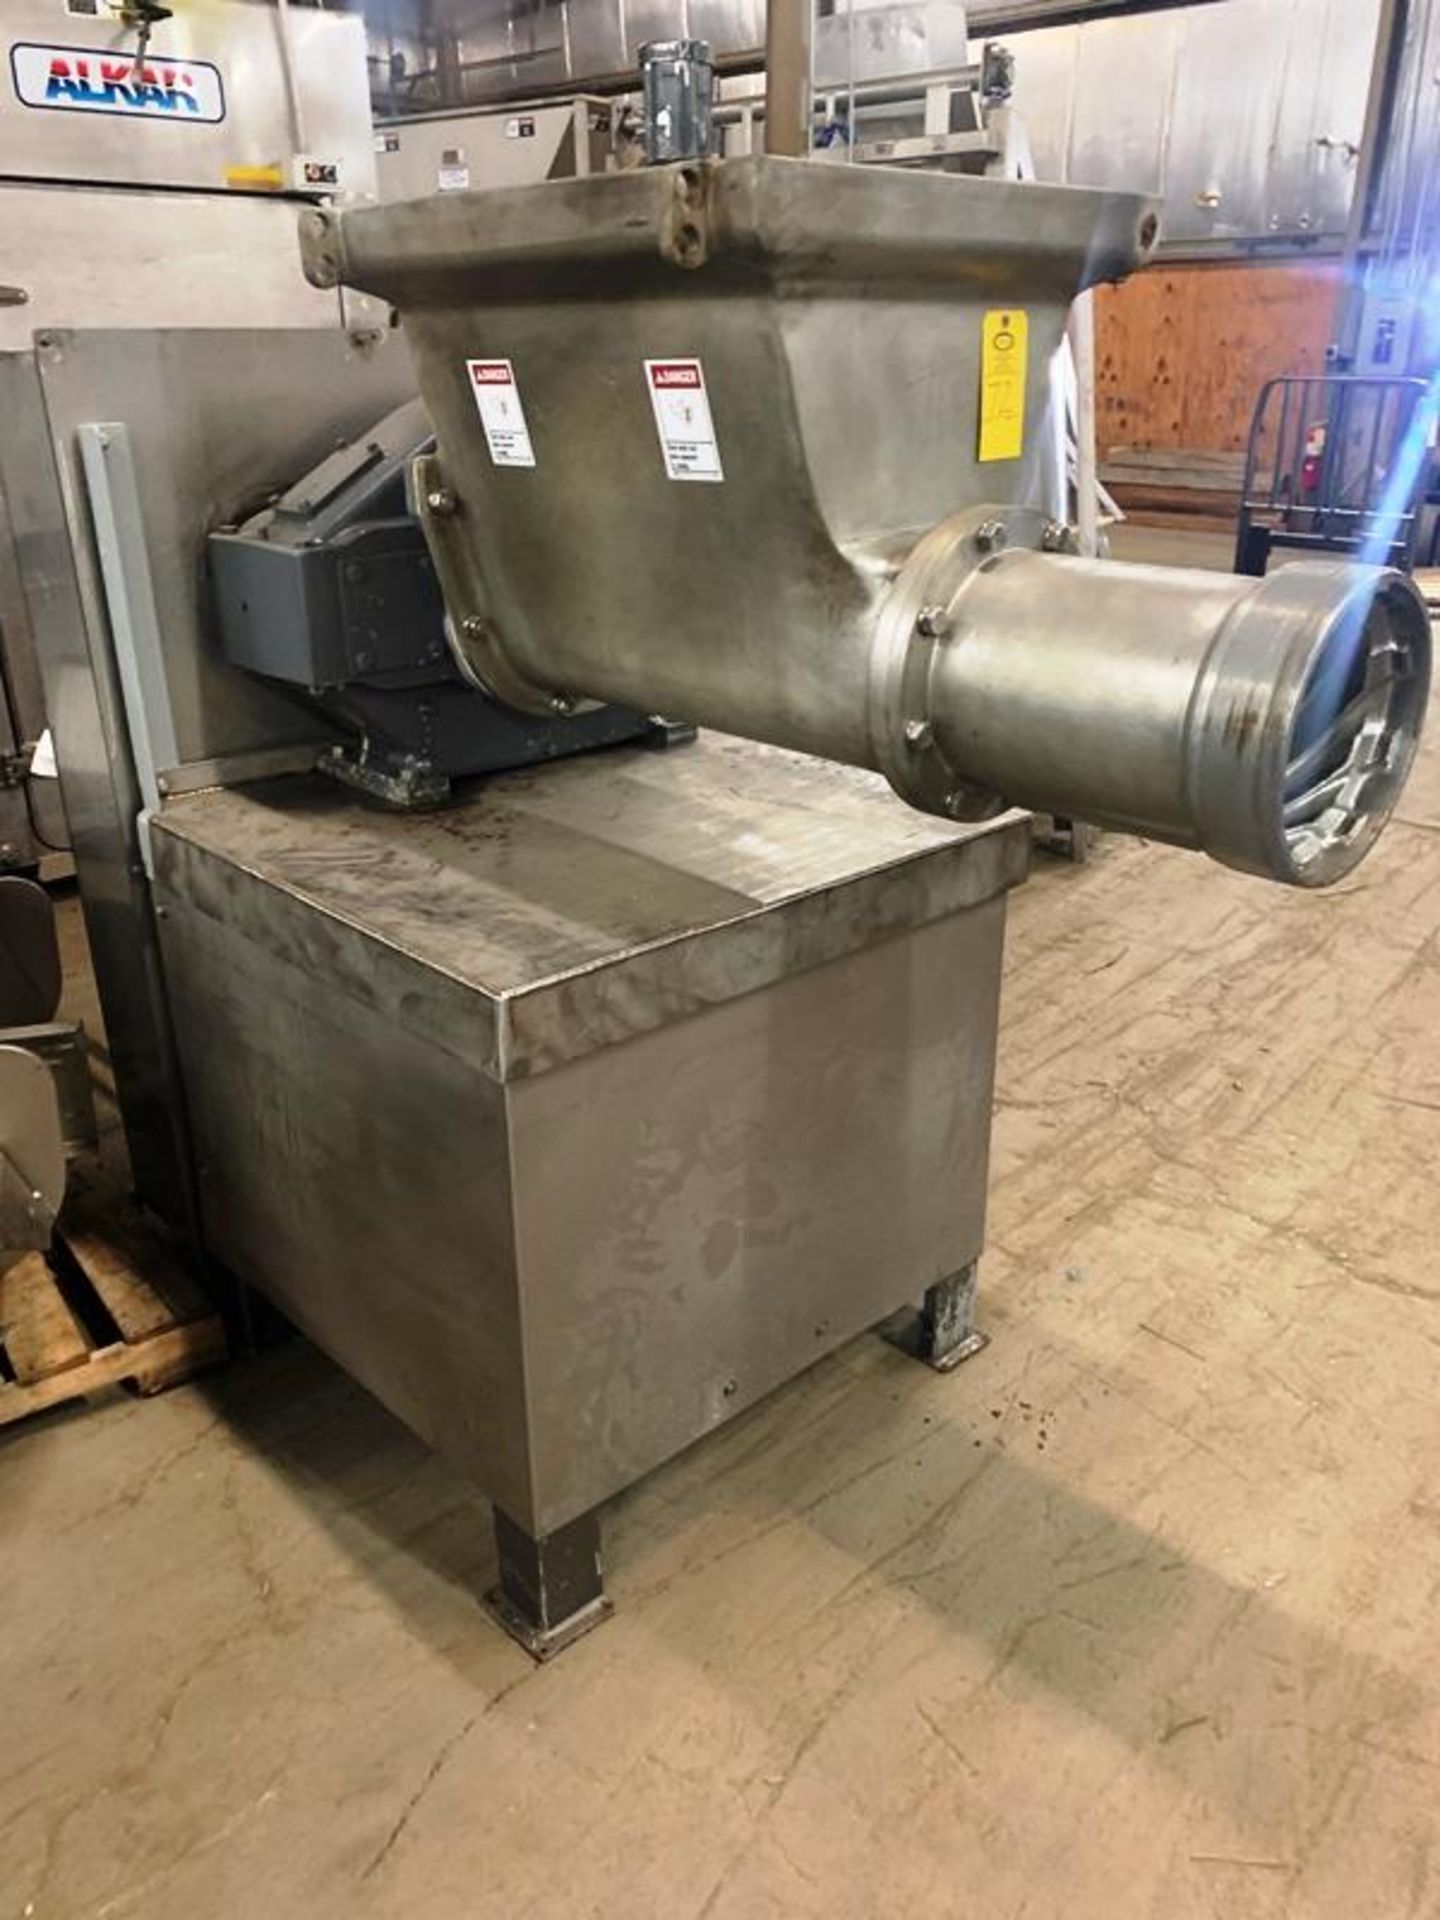 Weiler Grinder with 1992 -5HA gearbox, tinned hopper and barrel, barrel number 2574-ARA, with - Image 7 of 8